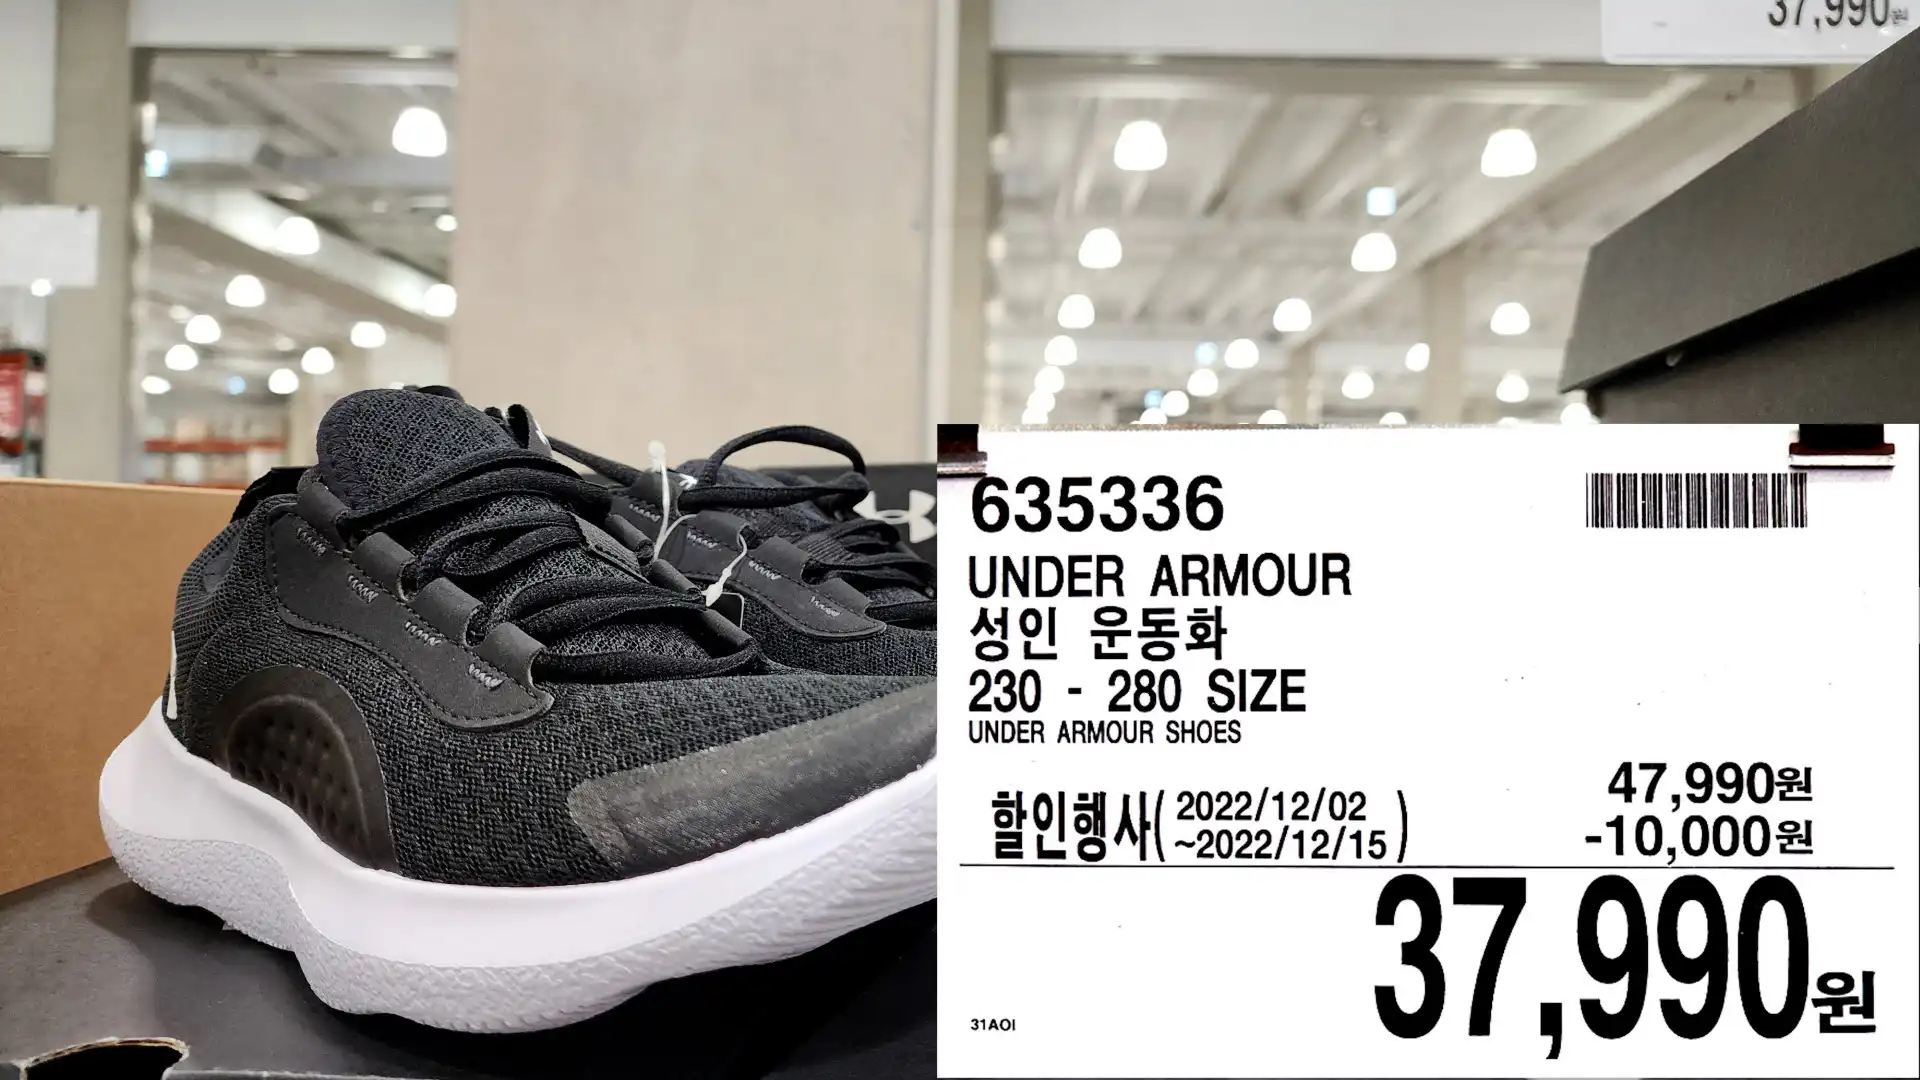 UNDER ARMOUR
성인 운동화
230 280 SIZE
UNDER ARMOUR SHOES
37&#44;990원